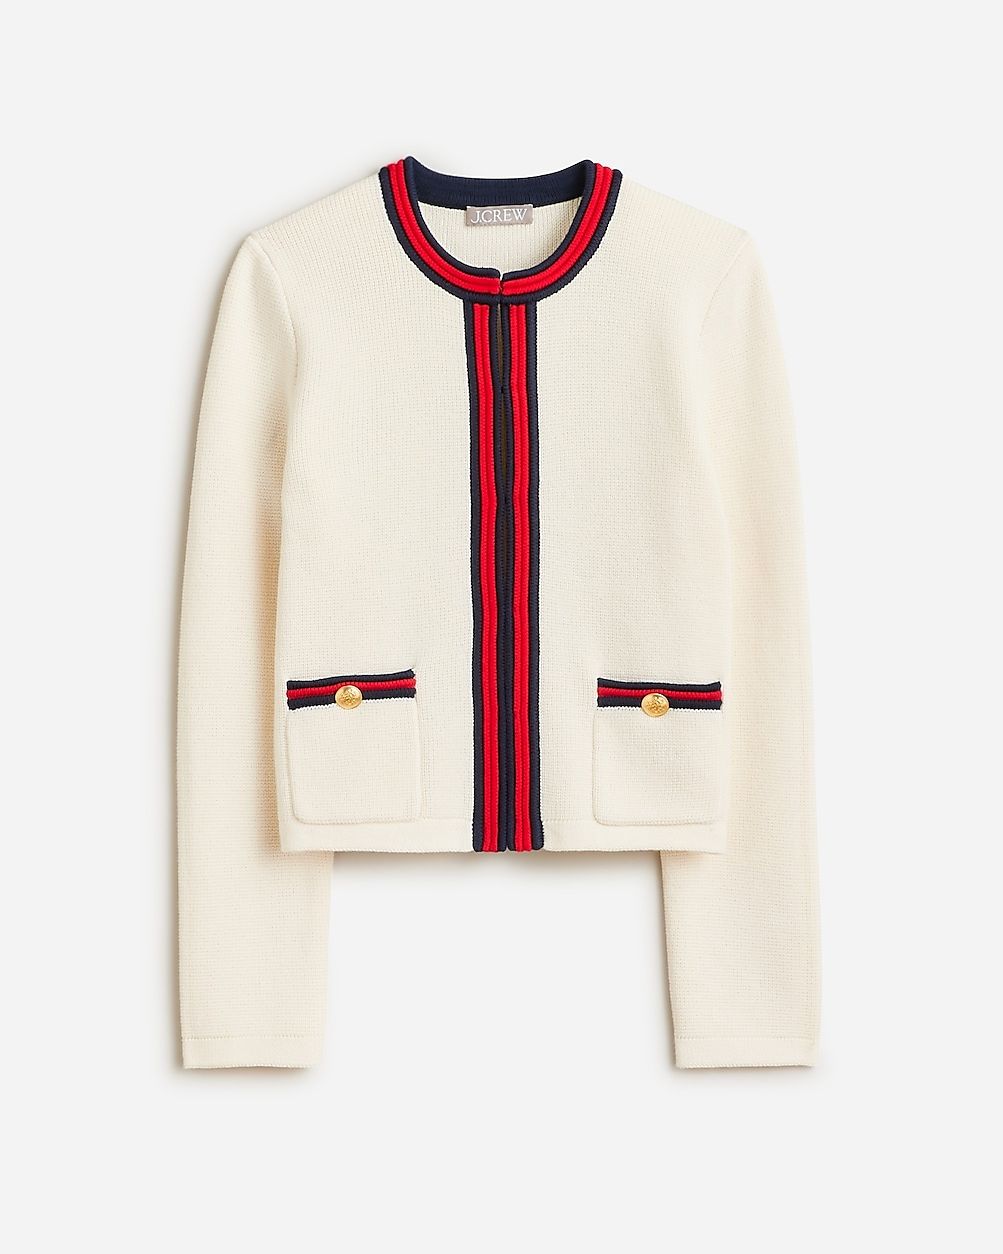 top rated4.7(672 REVIEWS)Emilie sweater lady jacket with contrast trim$148.00Limited time. Price ... | J.Crew US